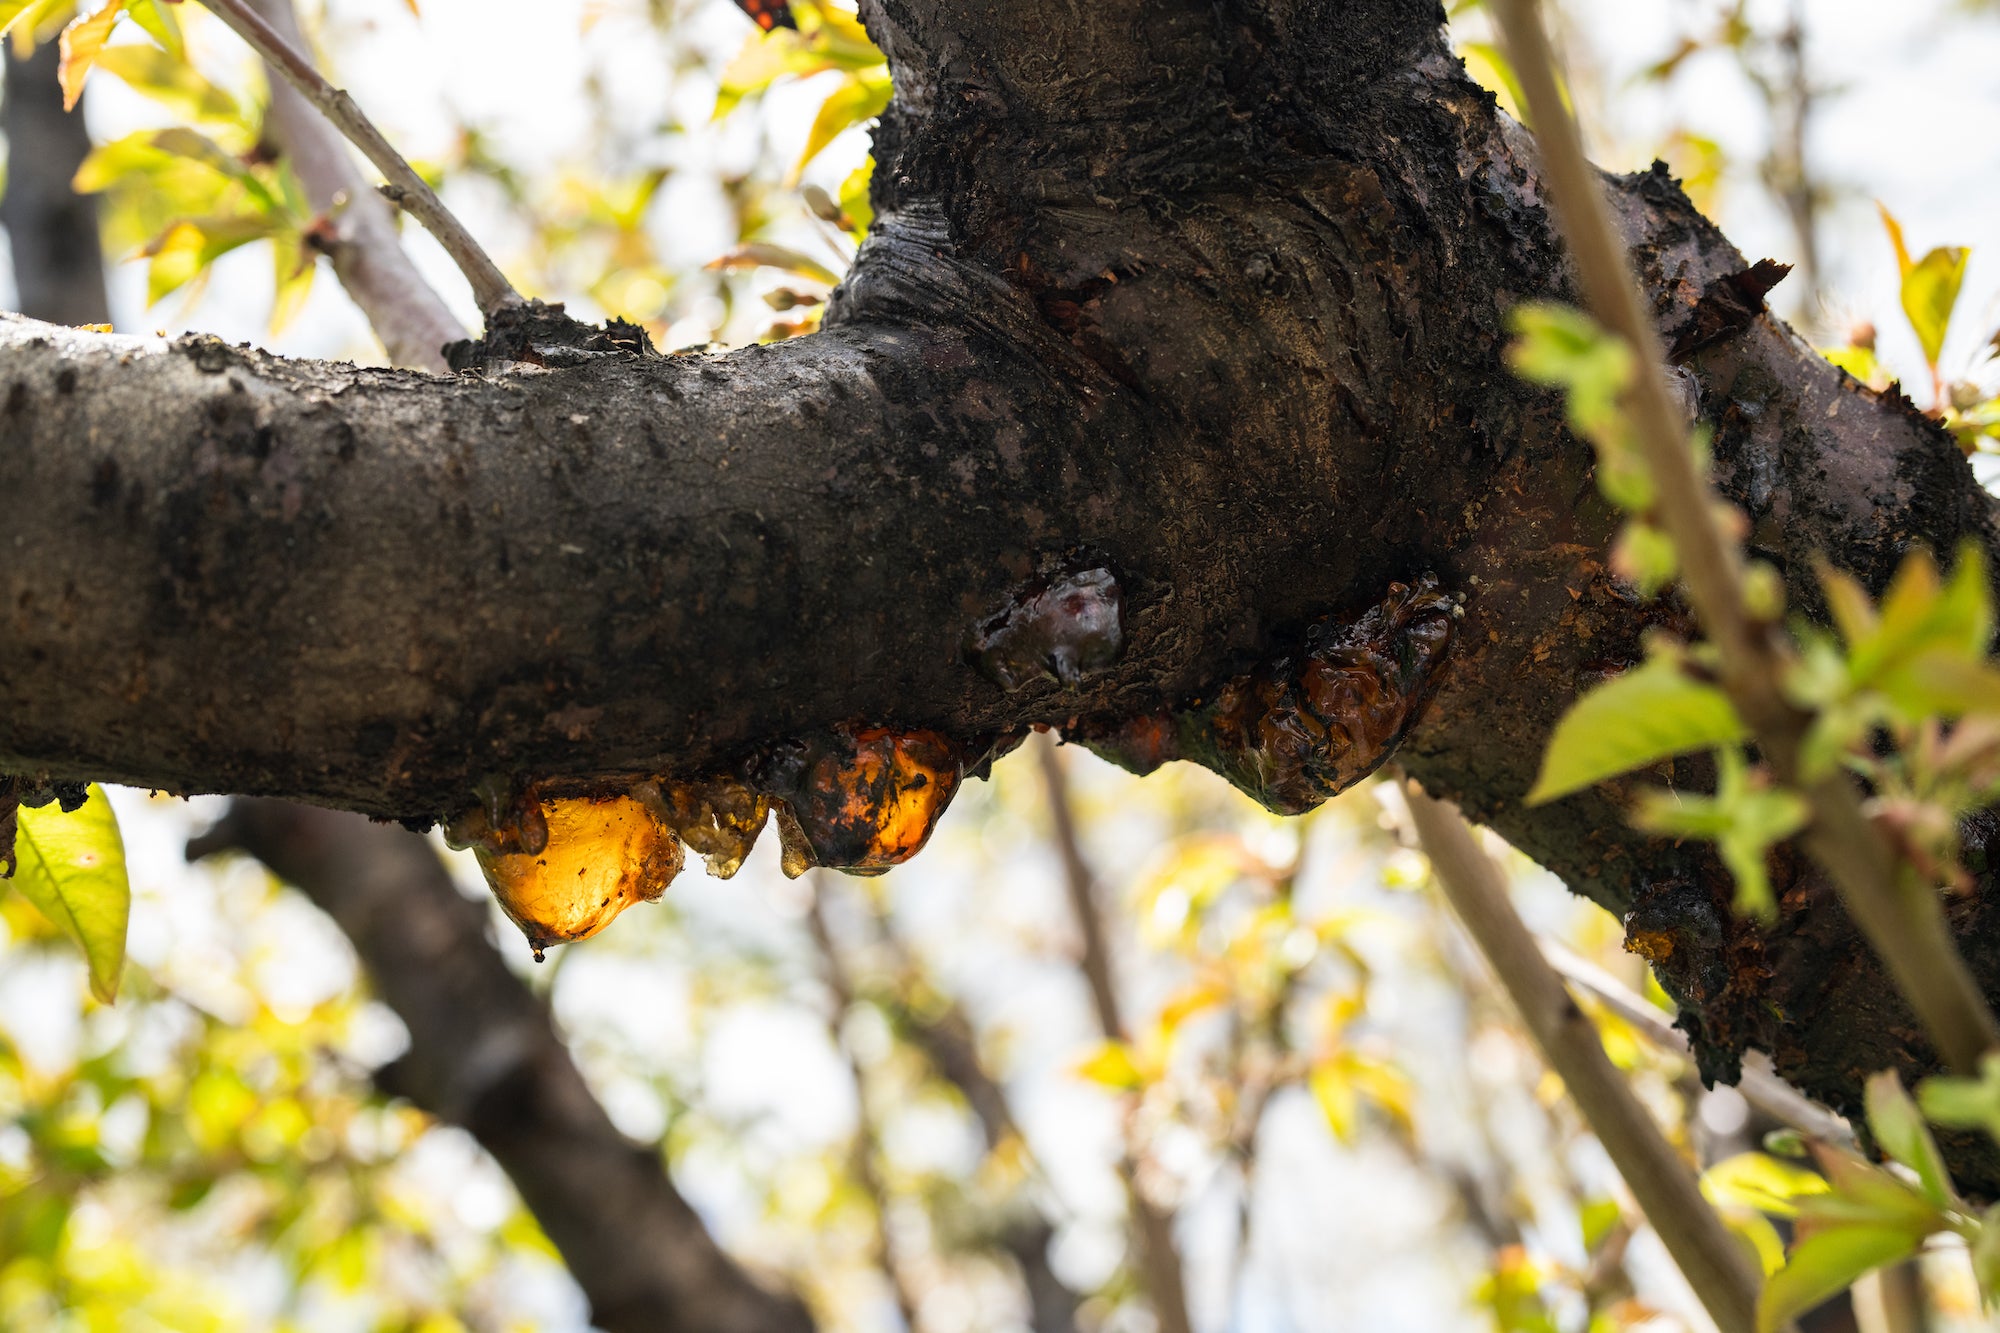 A cherry tree showing signs of gumming from a bacterial canker in a Lodi orchard. The branch of the tree shows what look like gummy-type balls dripping from the tree. (Jael Mackendorf/UC Davis)